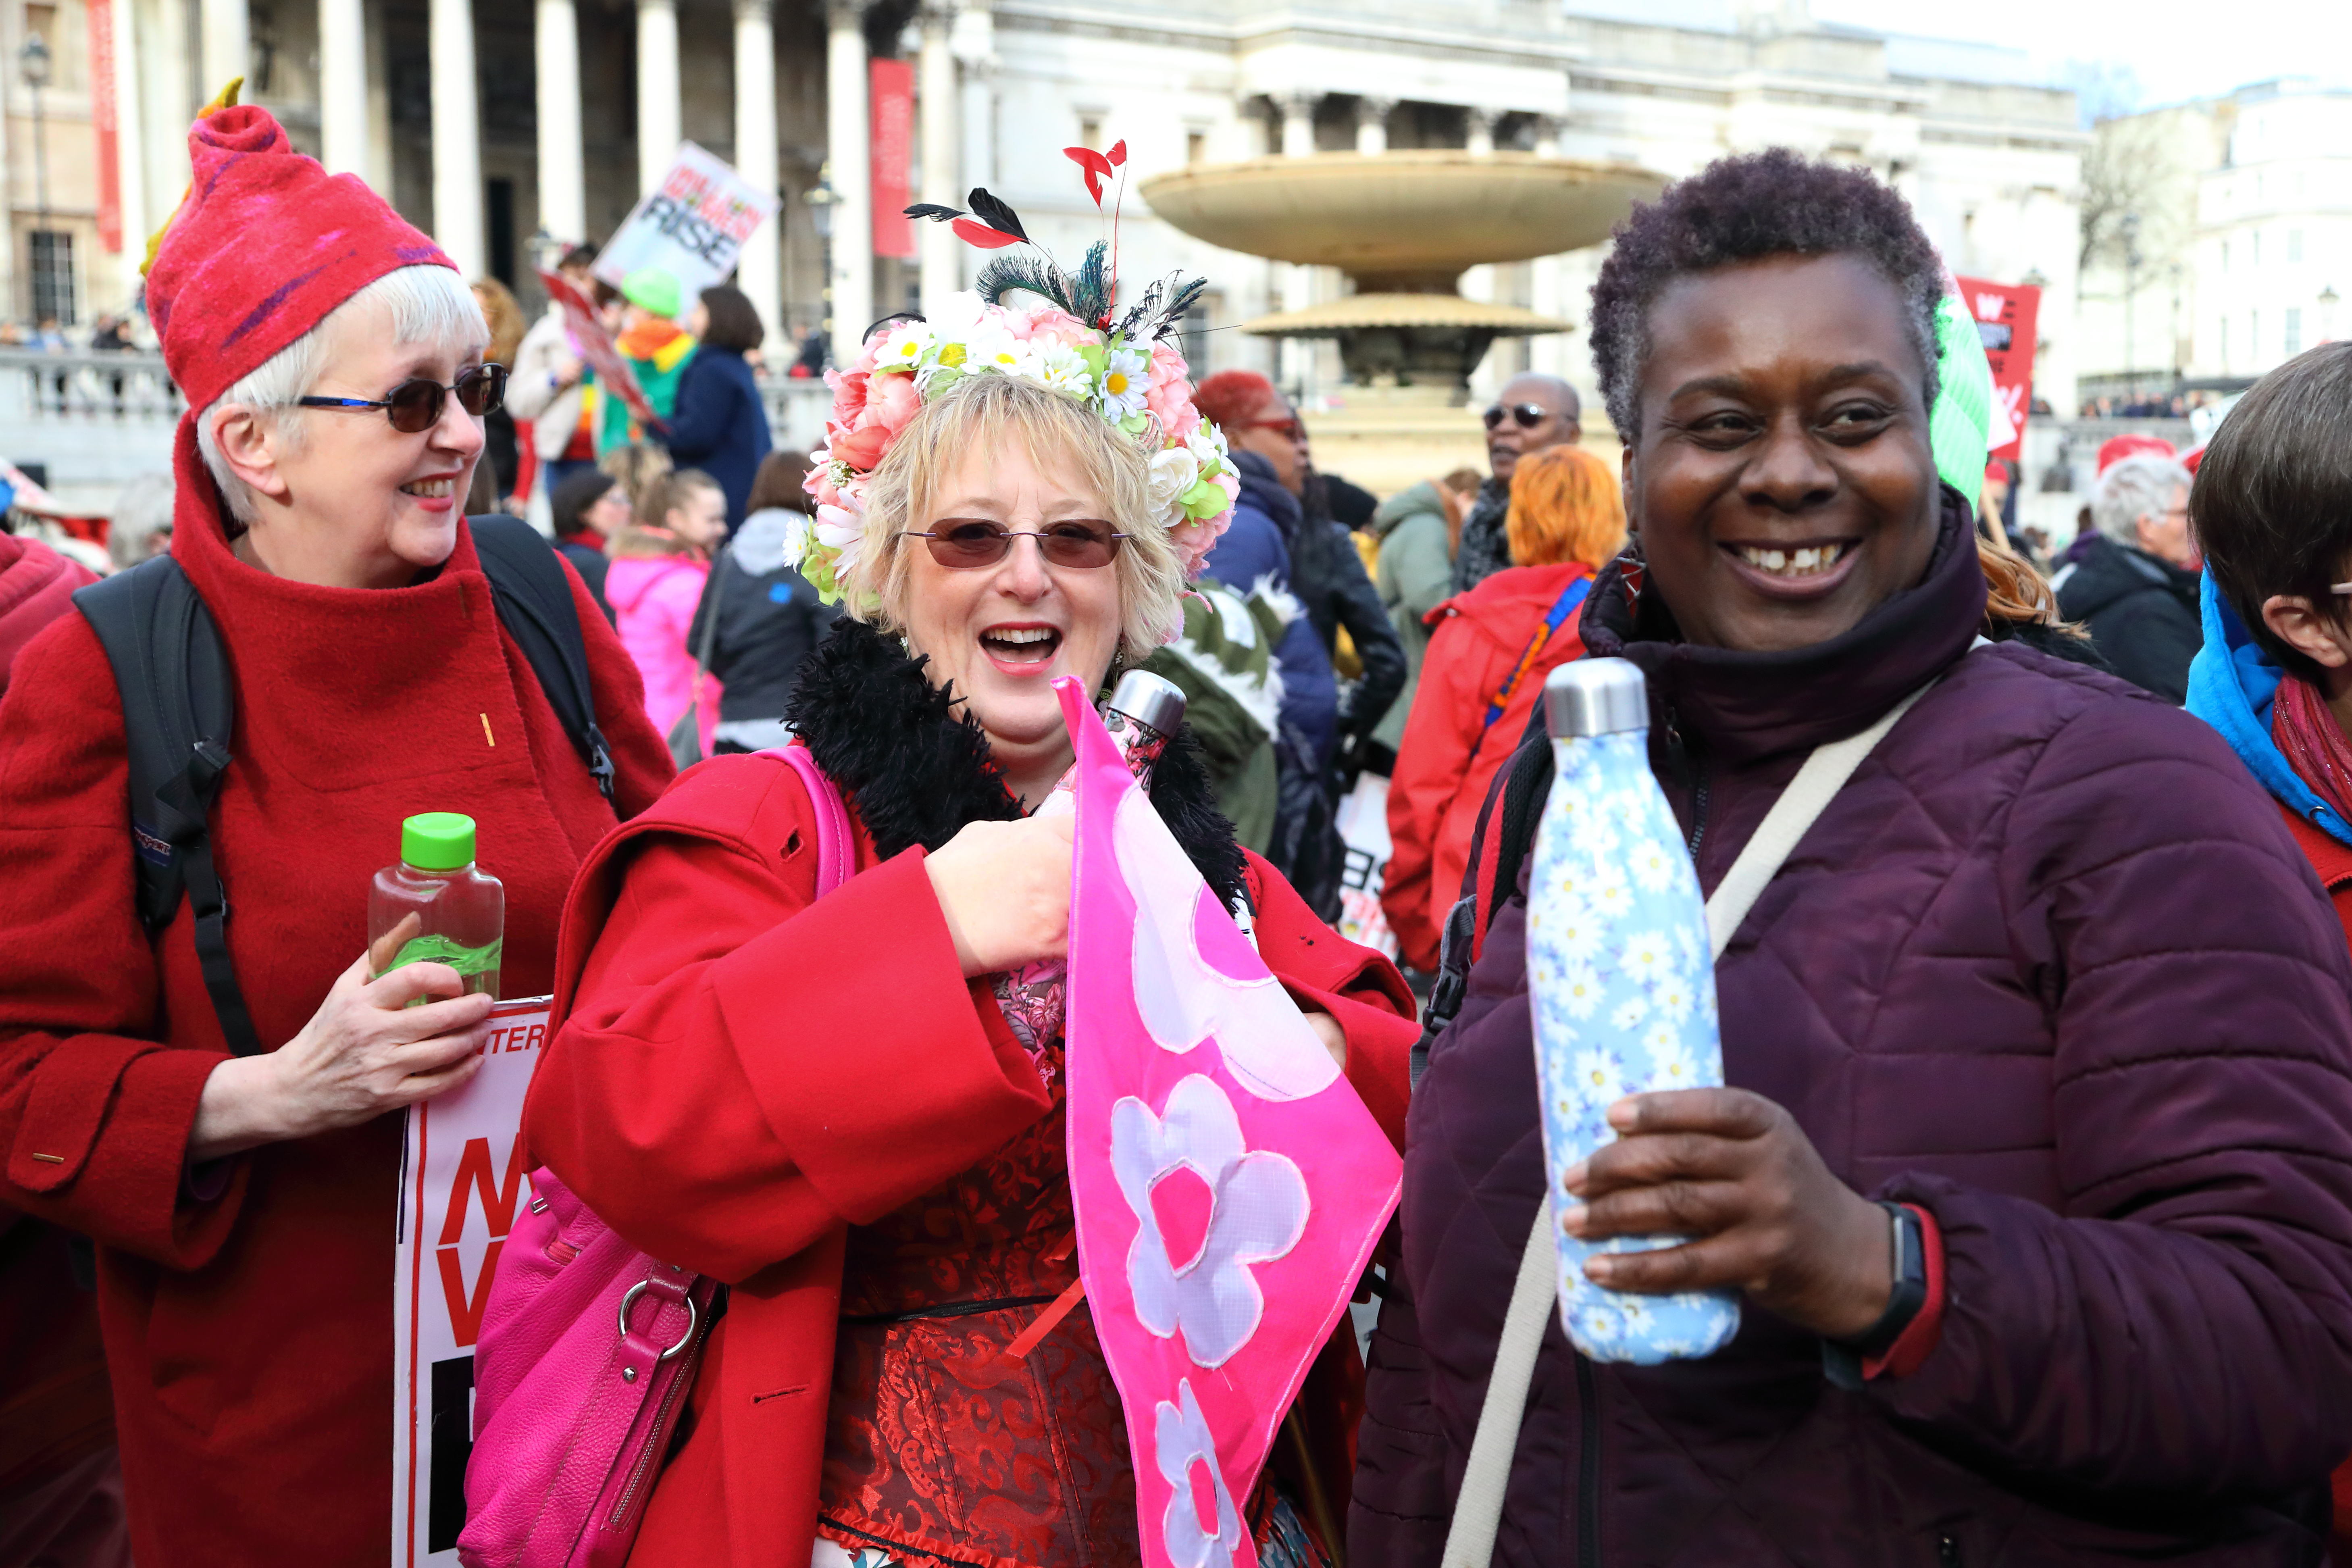 Three smiling women in warm coats, holding banners at their sides in a relaxed crowd outside a grand colonnaded building. 